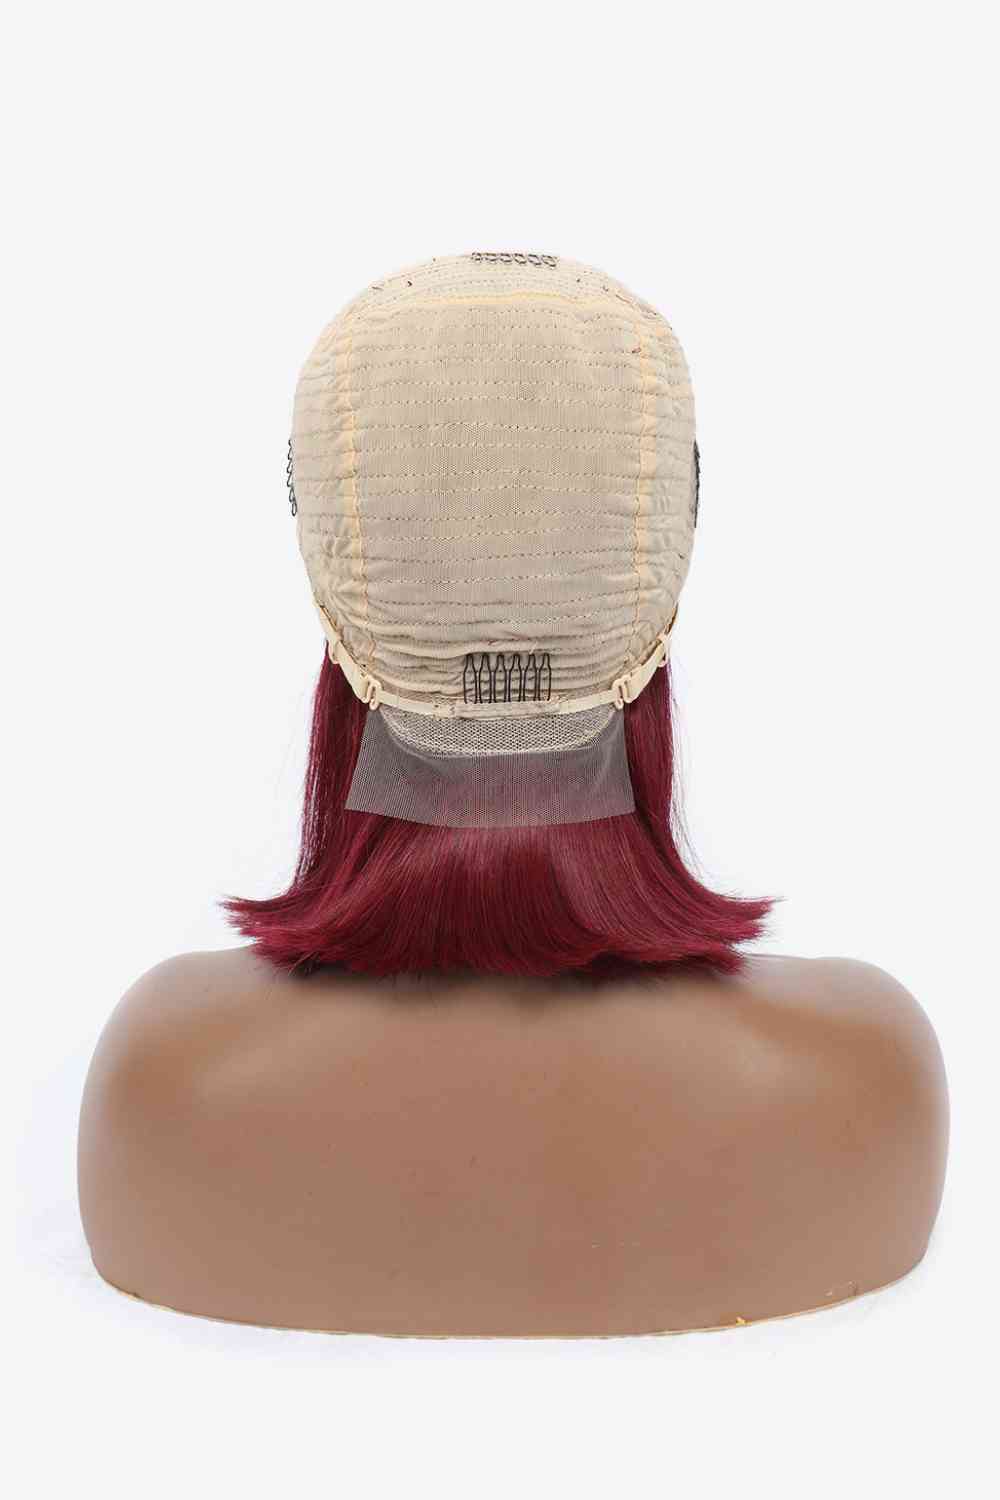 12" 155g #99J Lace Front Wigs Human Hair 150% Density